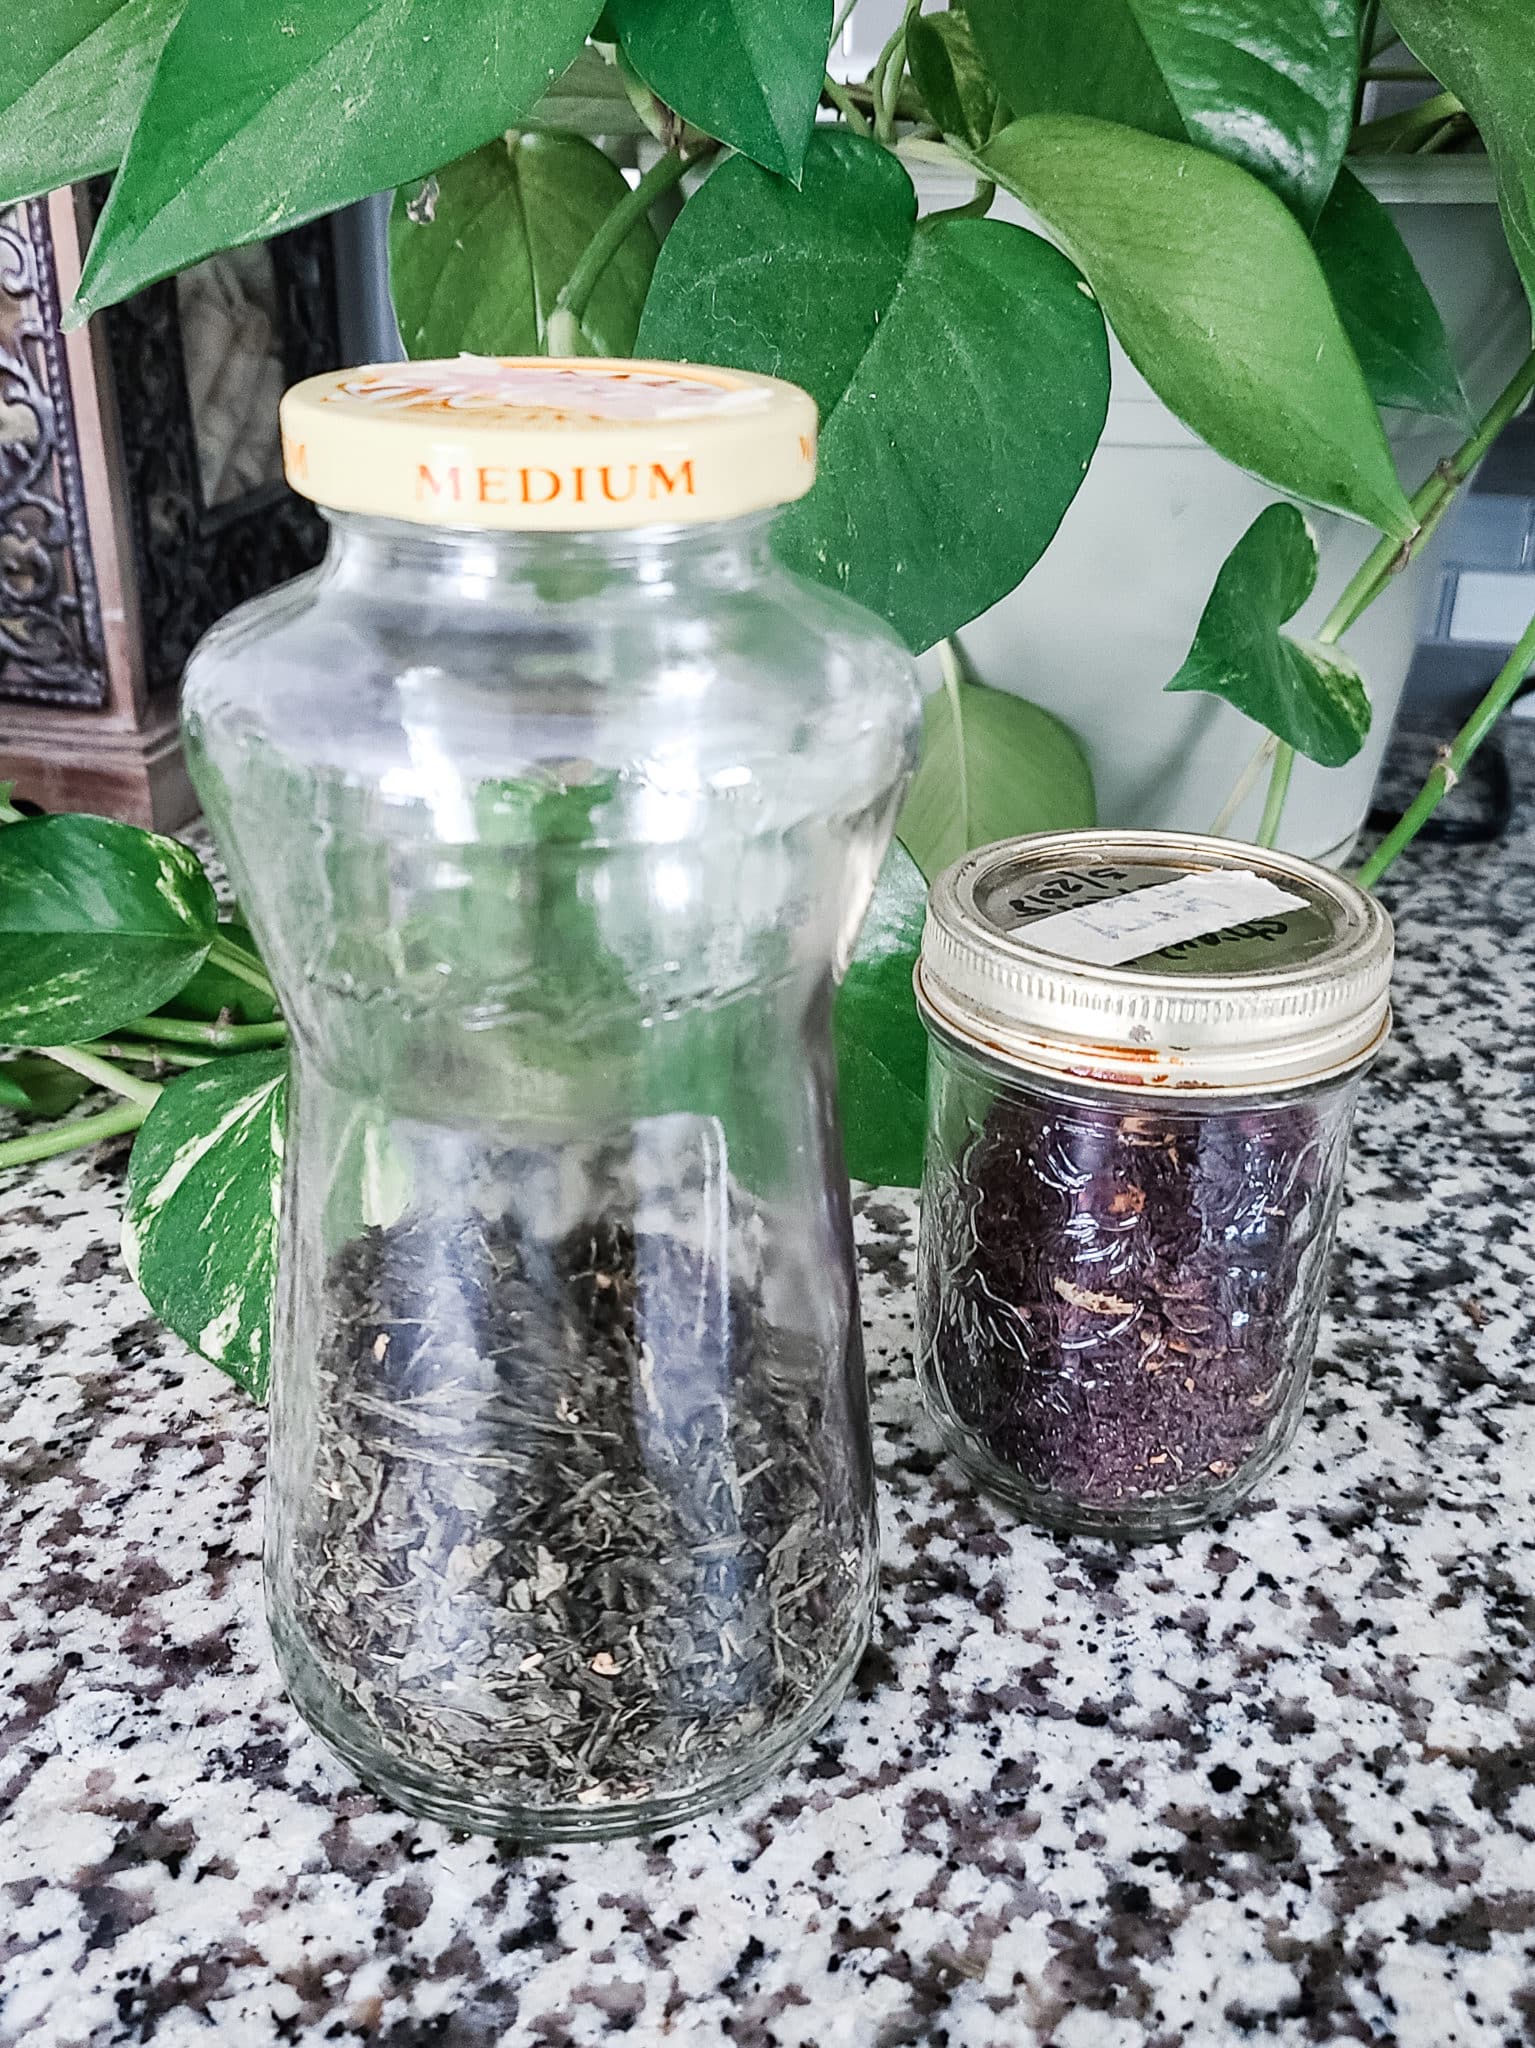 Buying loose leaf tea in bulk as a more sustainable tea option